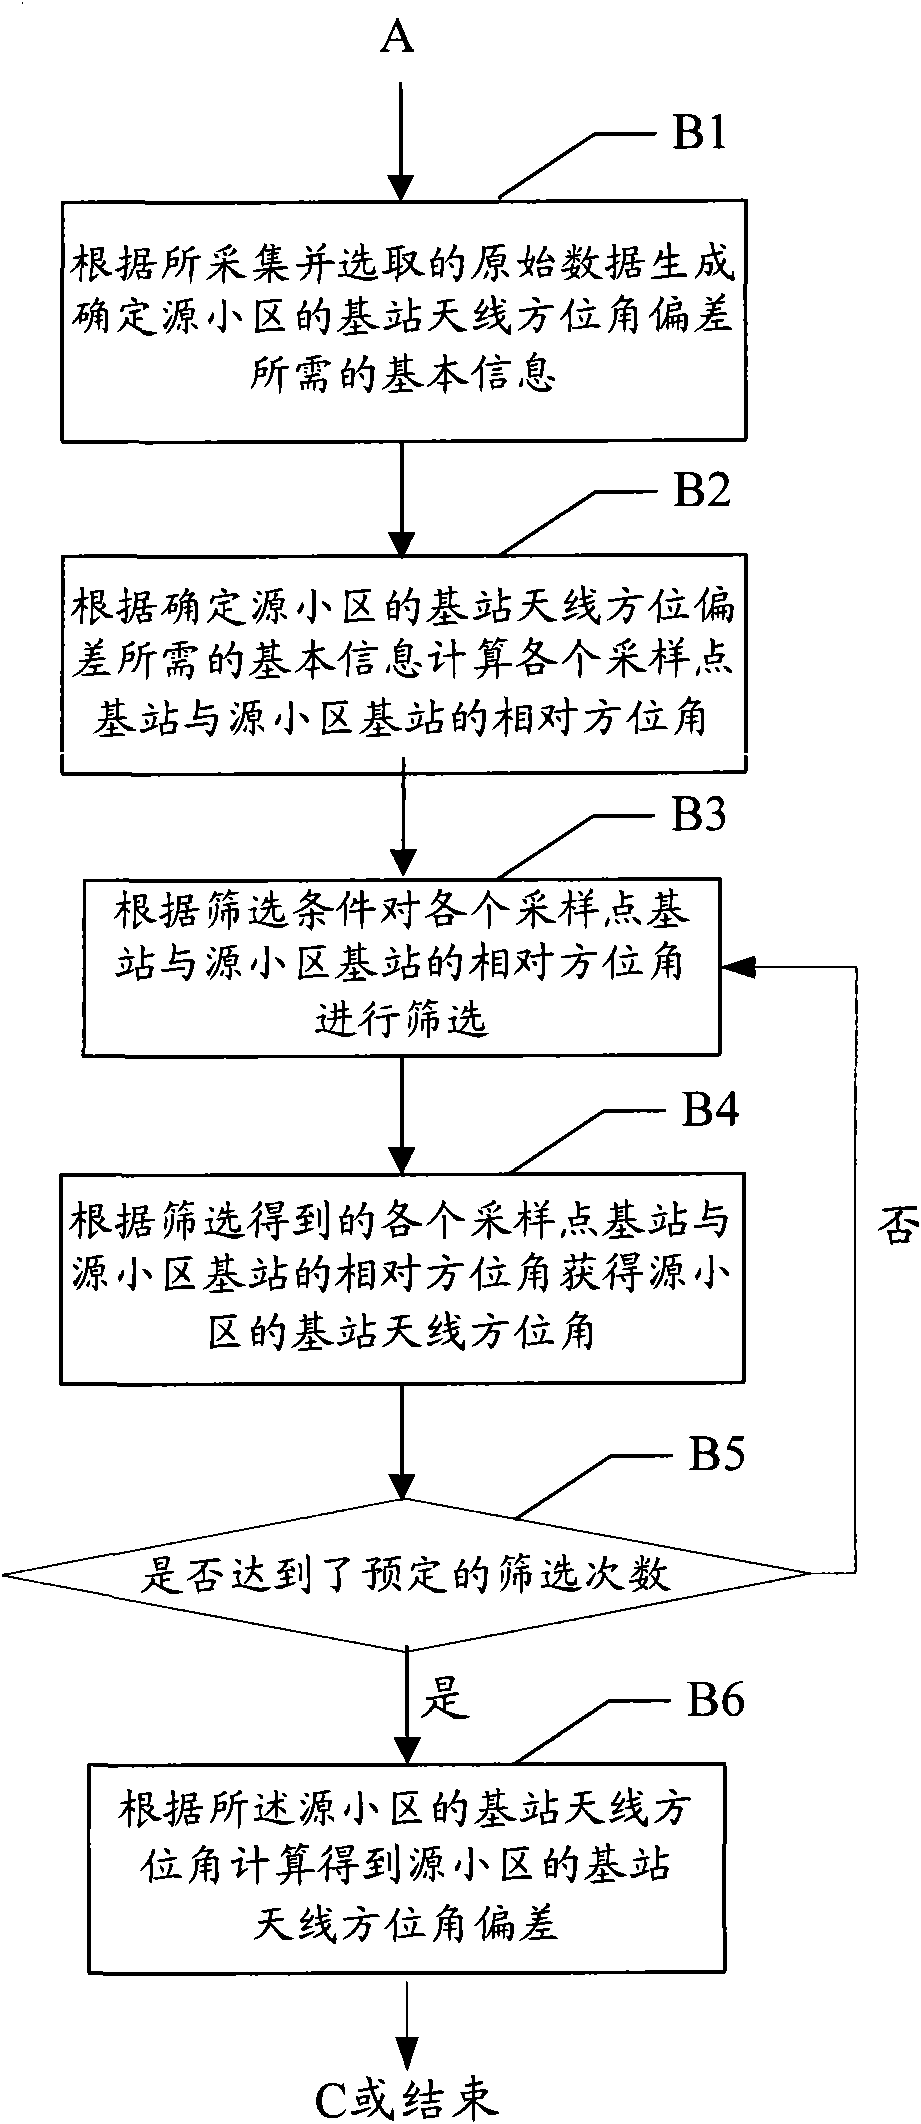 Method for determining deviation of azimuth angle of base station antenna